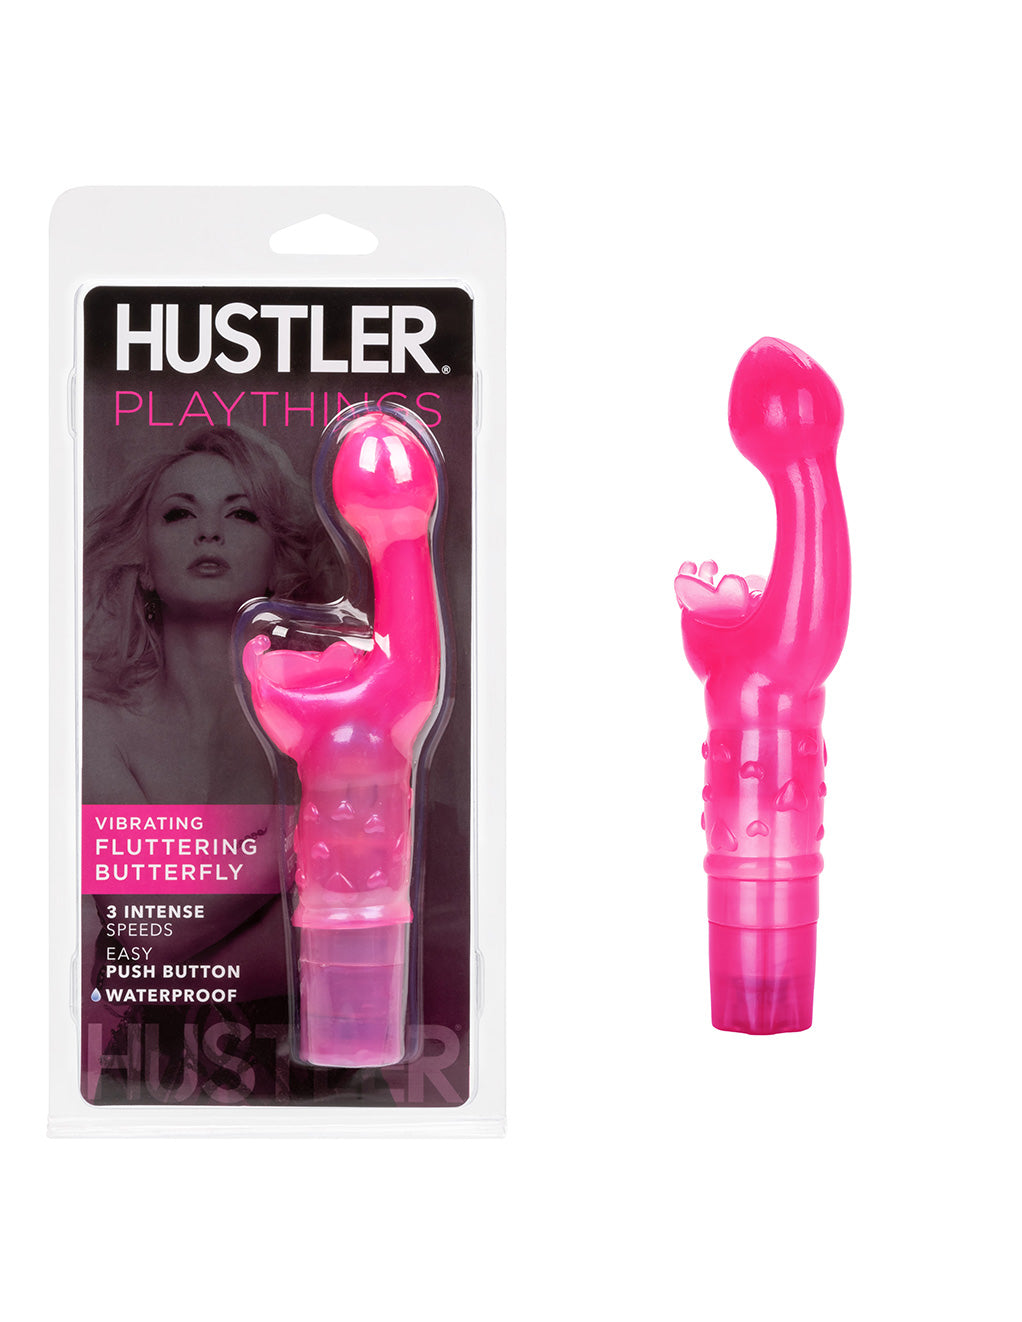 Hustler® Playthings Flutter Butterfly Dual Stimulation Vibrator- With package